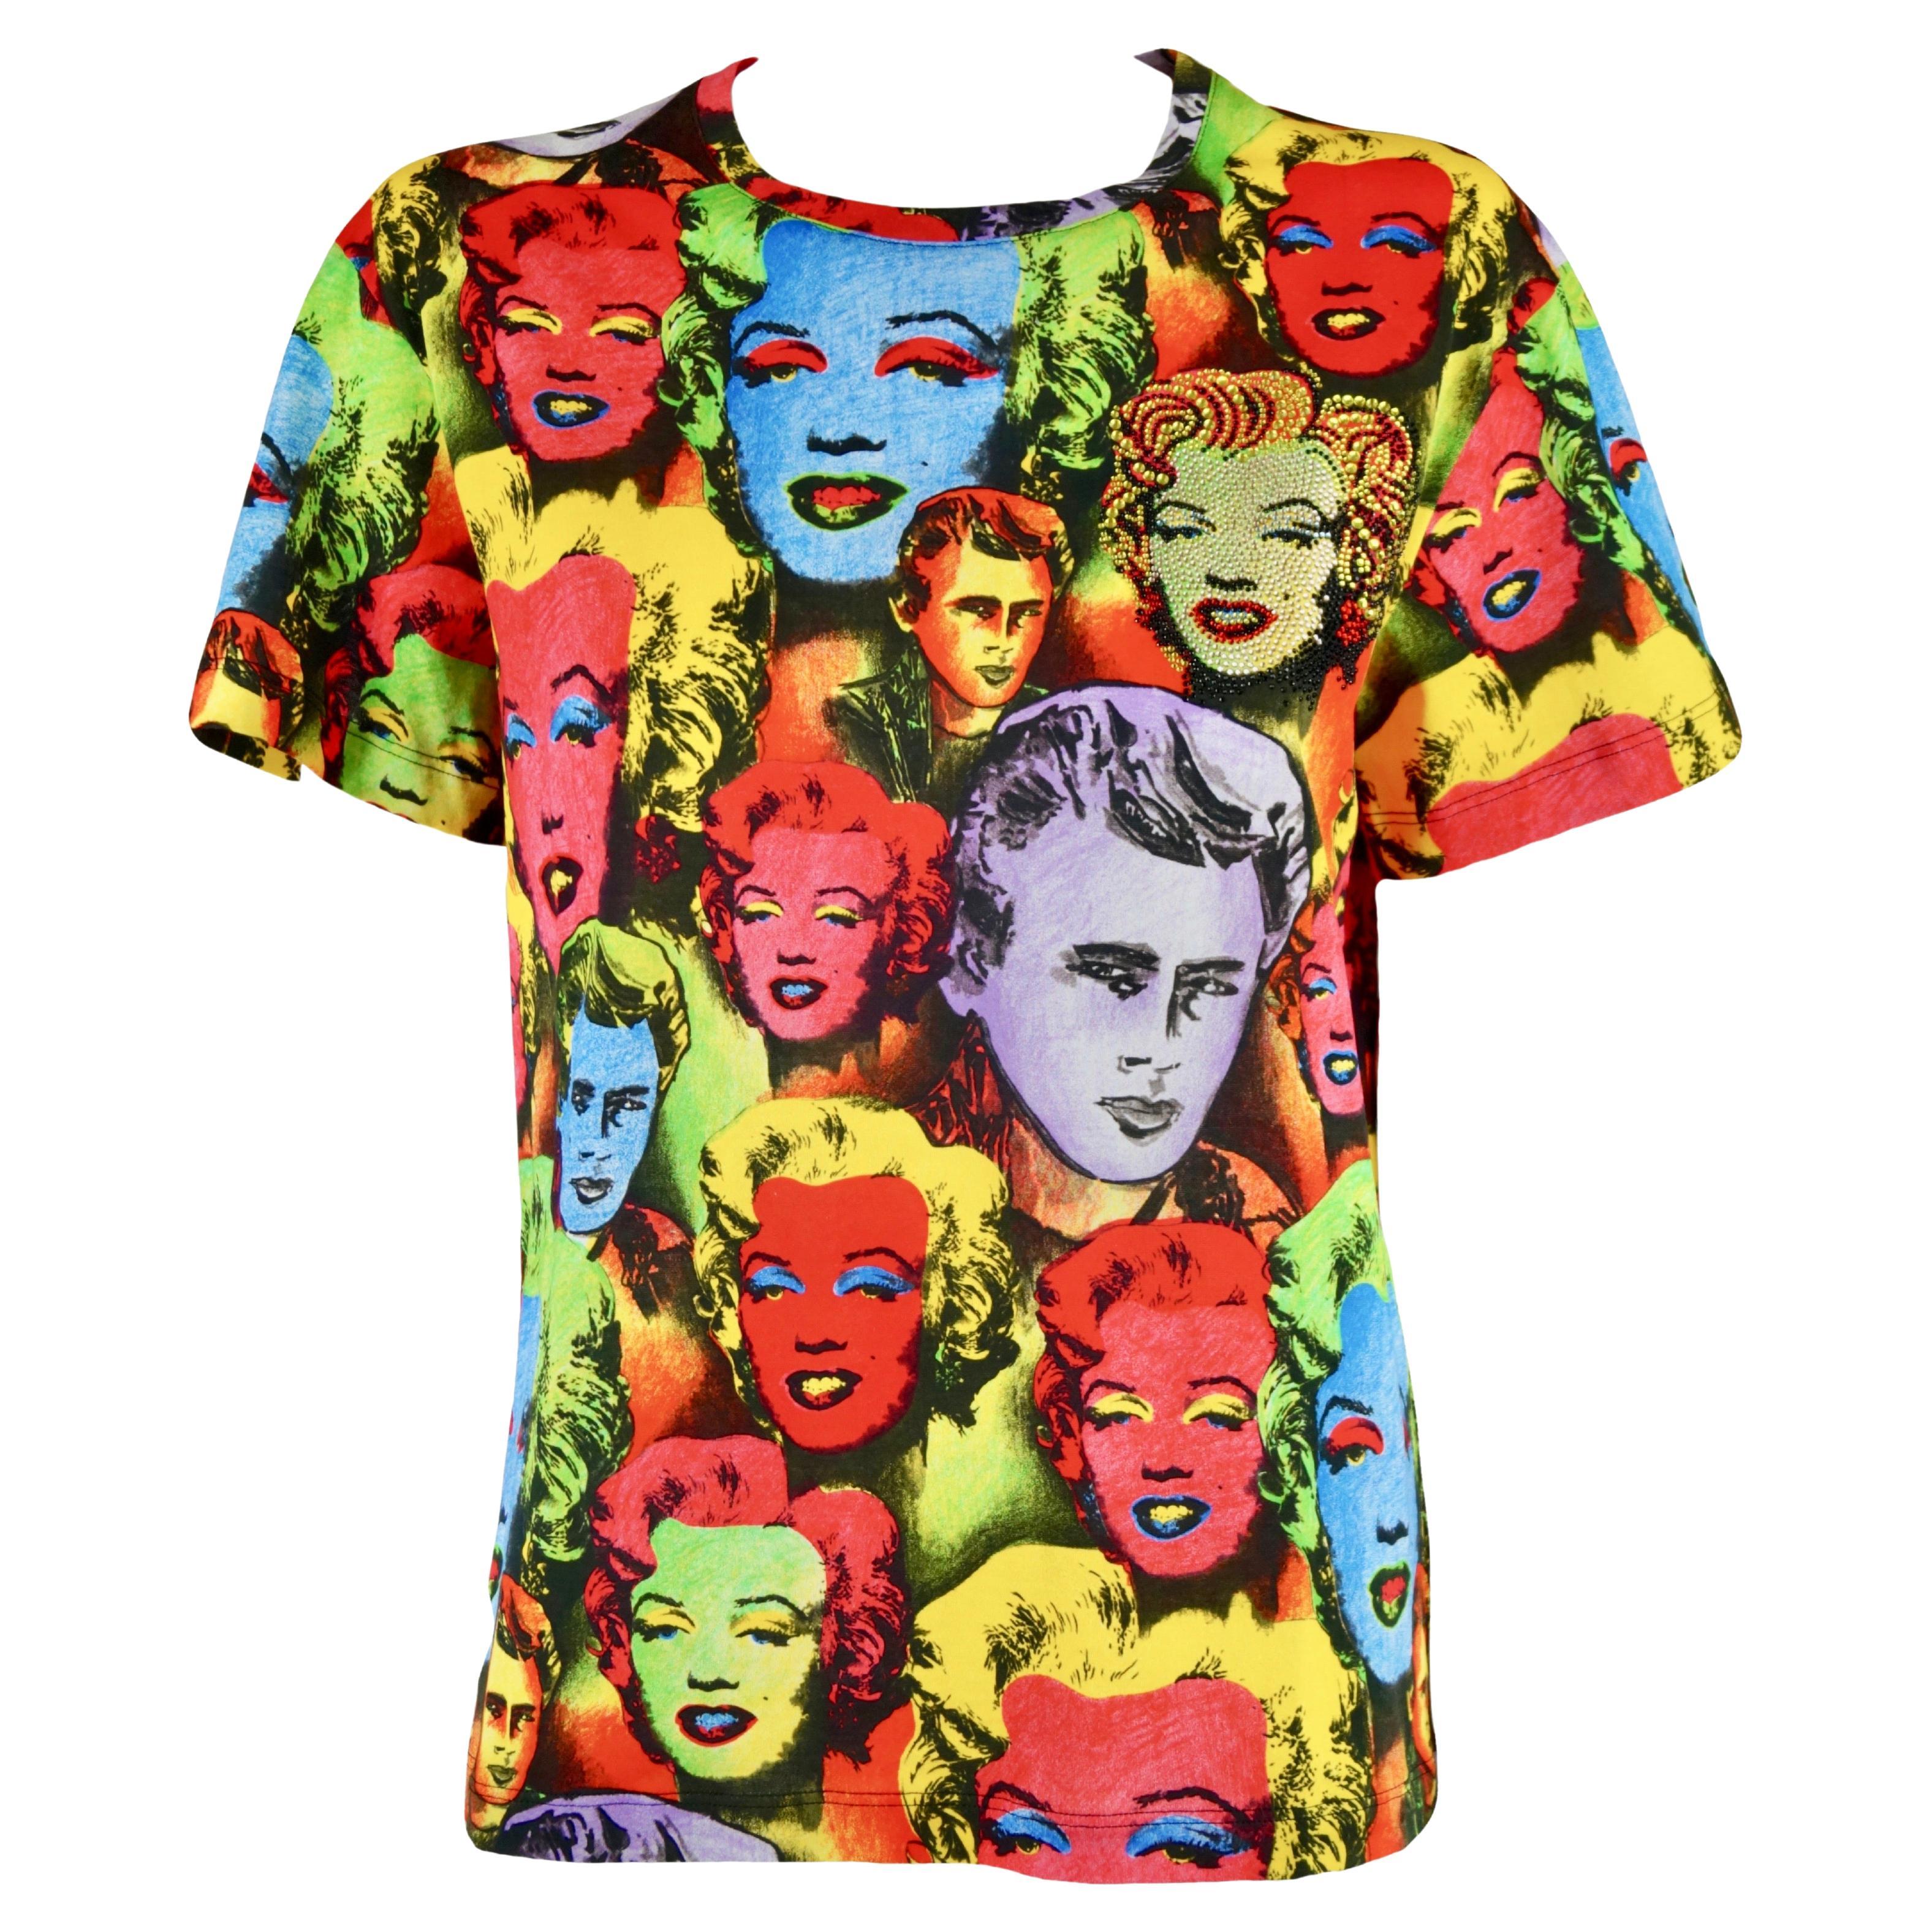 VERSACE Tribute 2017 Warhol SS 1991 Marilyn Monroe and James Dean T-shirt For Sale